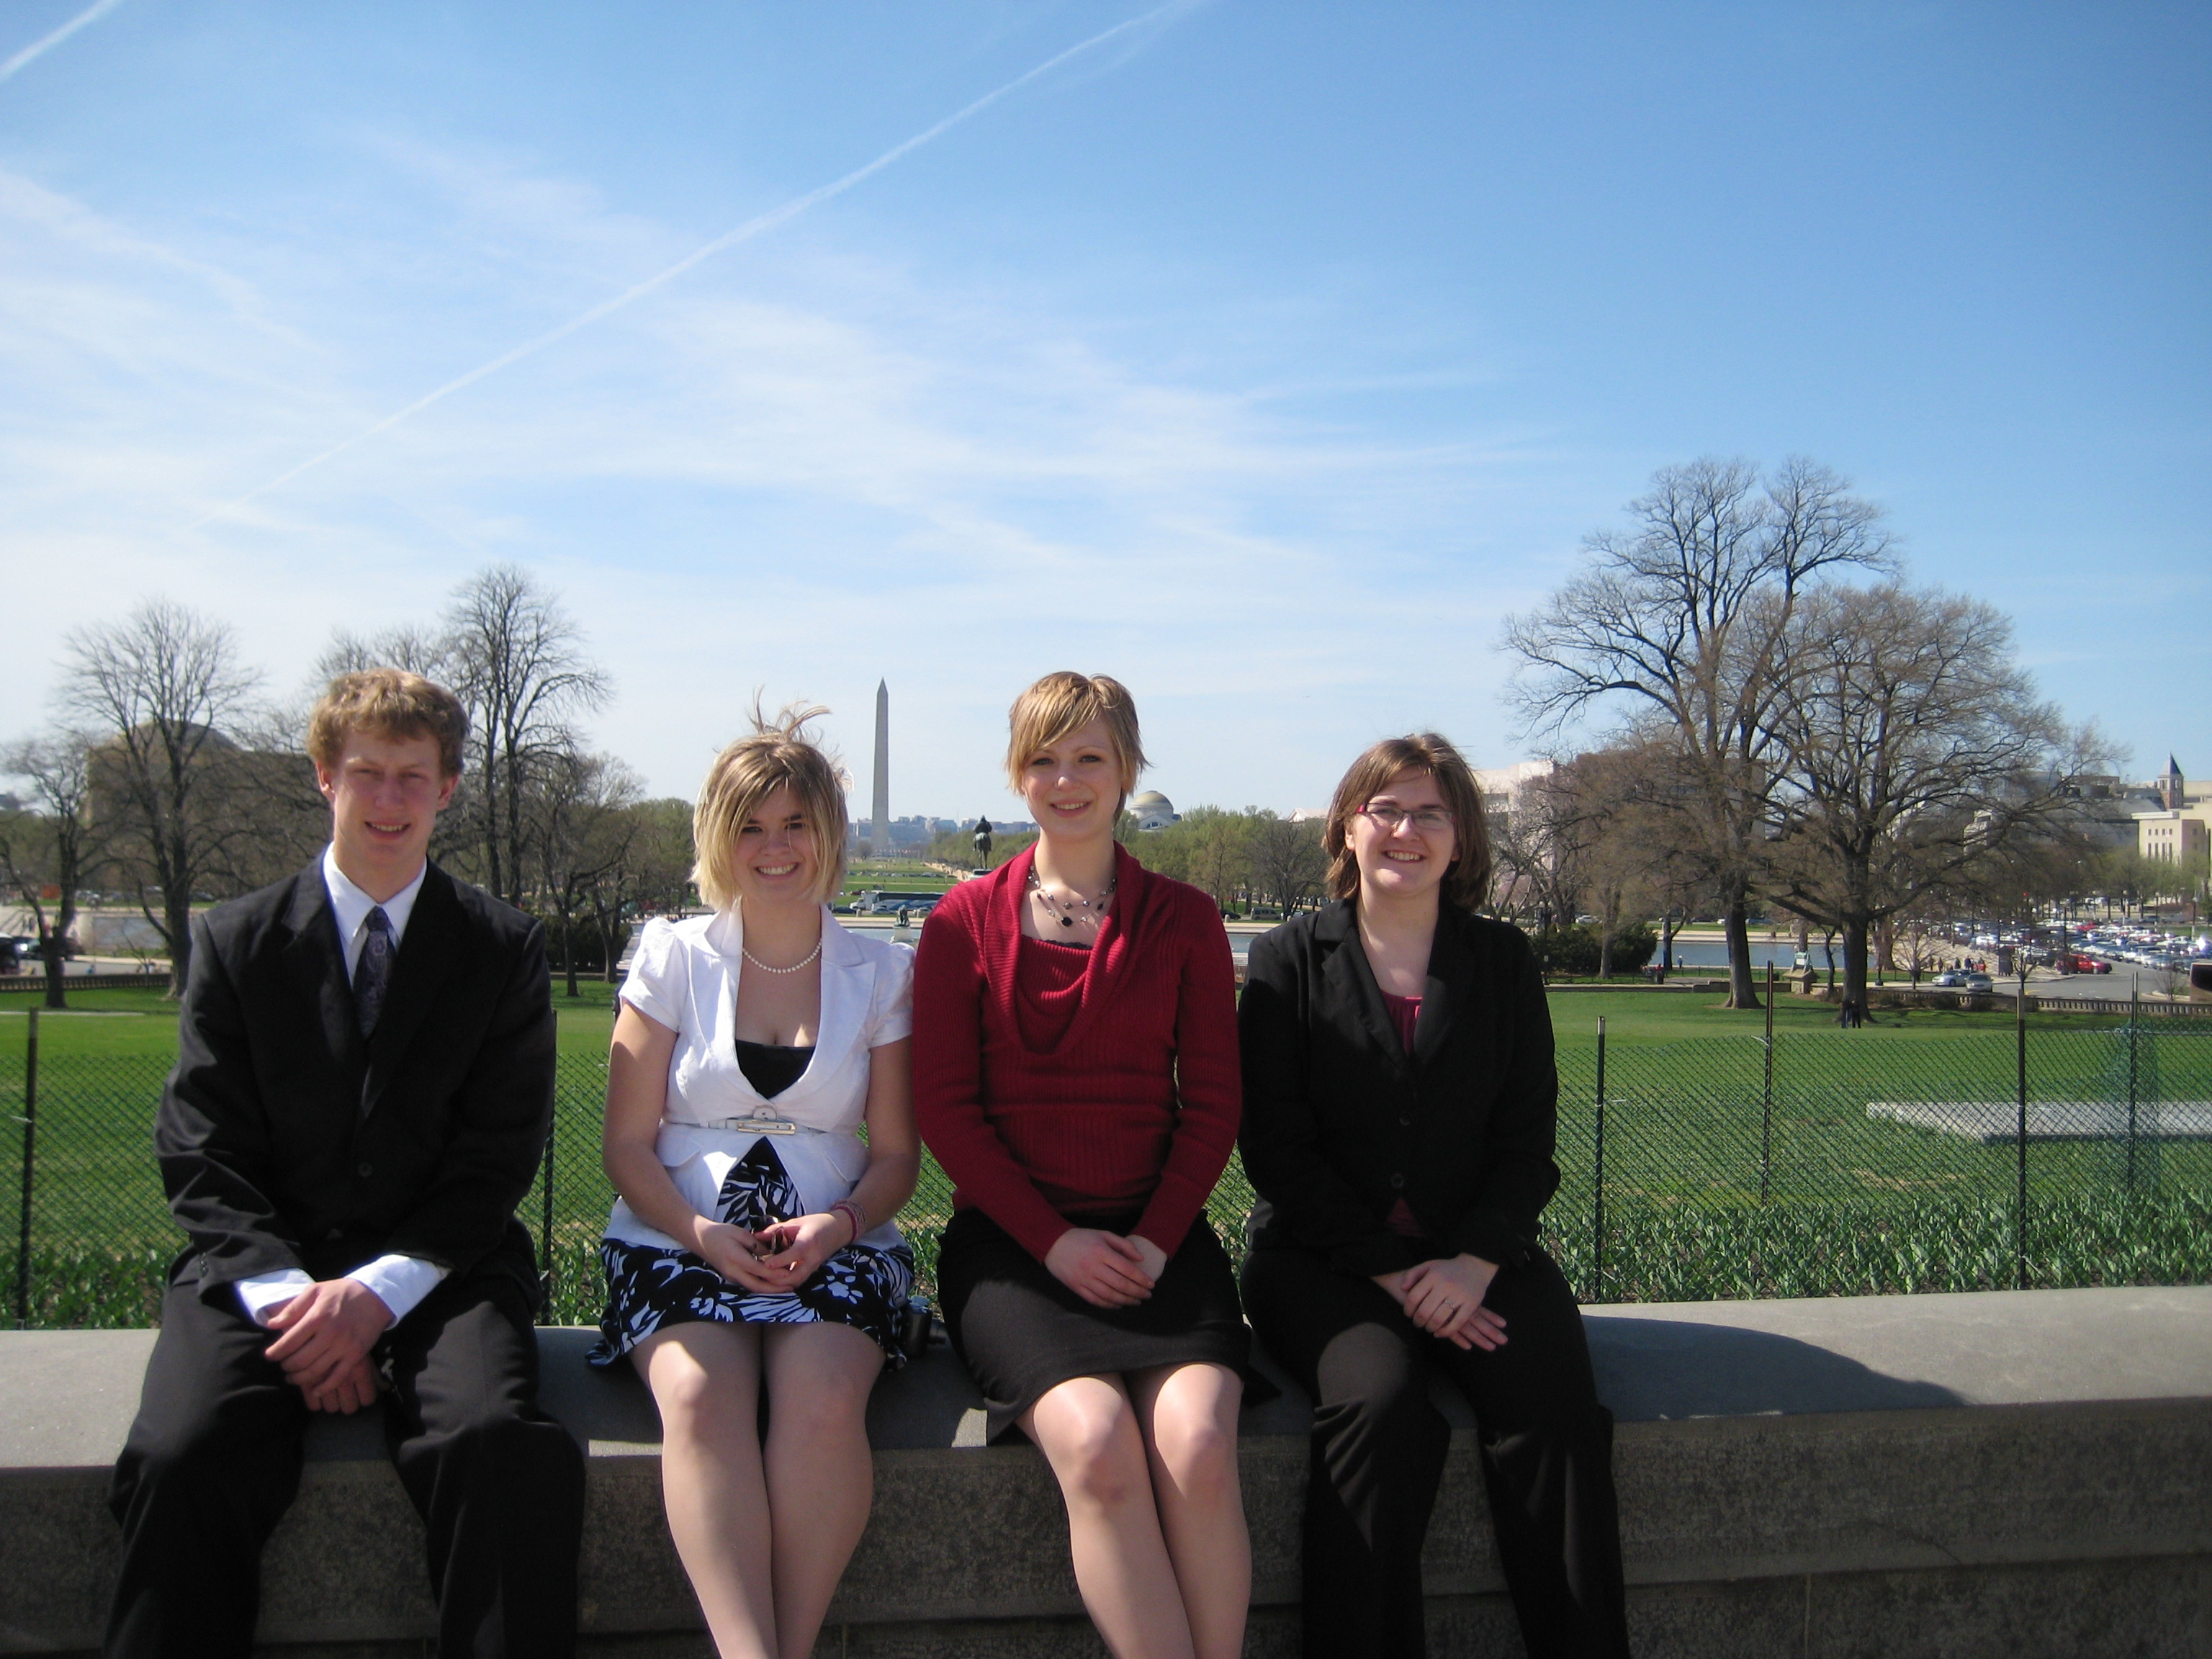 North Dakota 4-H members take a break while on a tour in Washington, D.C. They are, from left, Jason Jallo of Fordville, Rebecca O'Toole of Crystal, Hannah Klinnert of Kindred and Sophie Miller of Adrian.